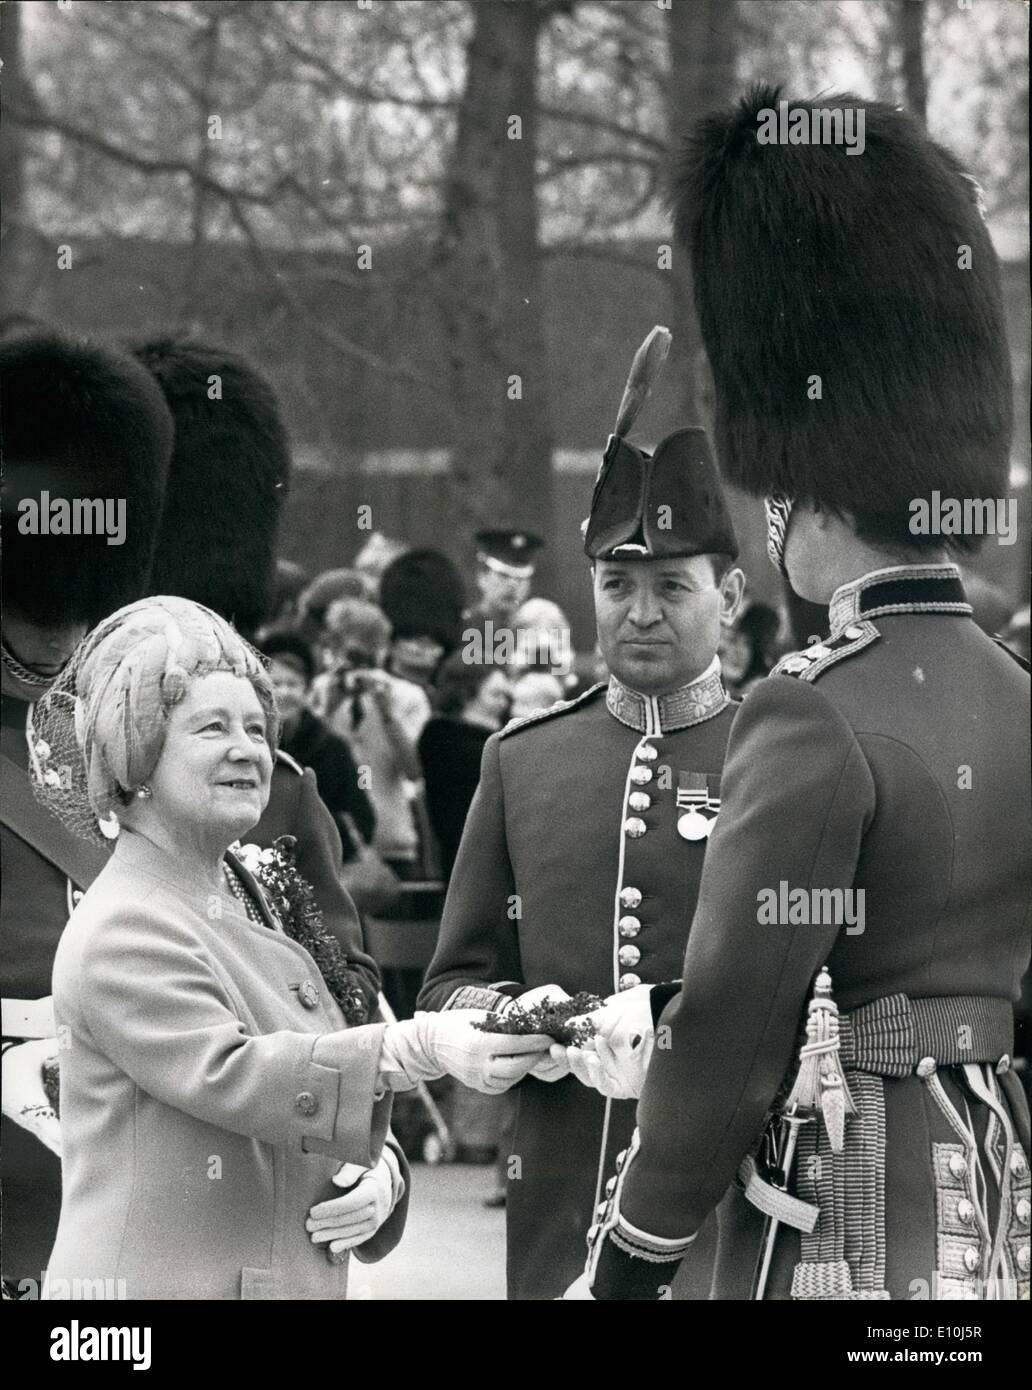 Mar. 03, 1973 - Queen Mother presents Shamrock to Irish Guards UN St. Patrick's day; Today is St. Patrick's Day, and Queen Elizabeth the Queen Mother visited the Irish Guards at Alexander Barracks, Pirbright to distribute Shamrock. Photo Shows Queen Elizabeth the Queen Mother handing out Shamrock, at Pirbright today. Stock Photo